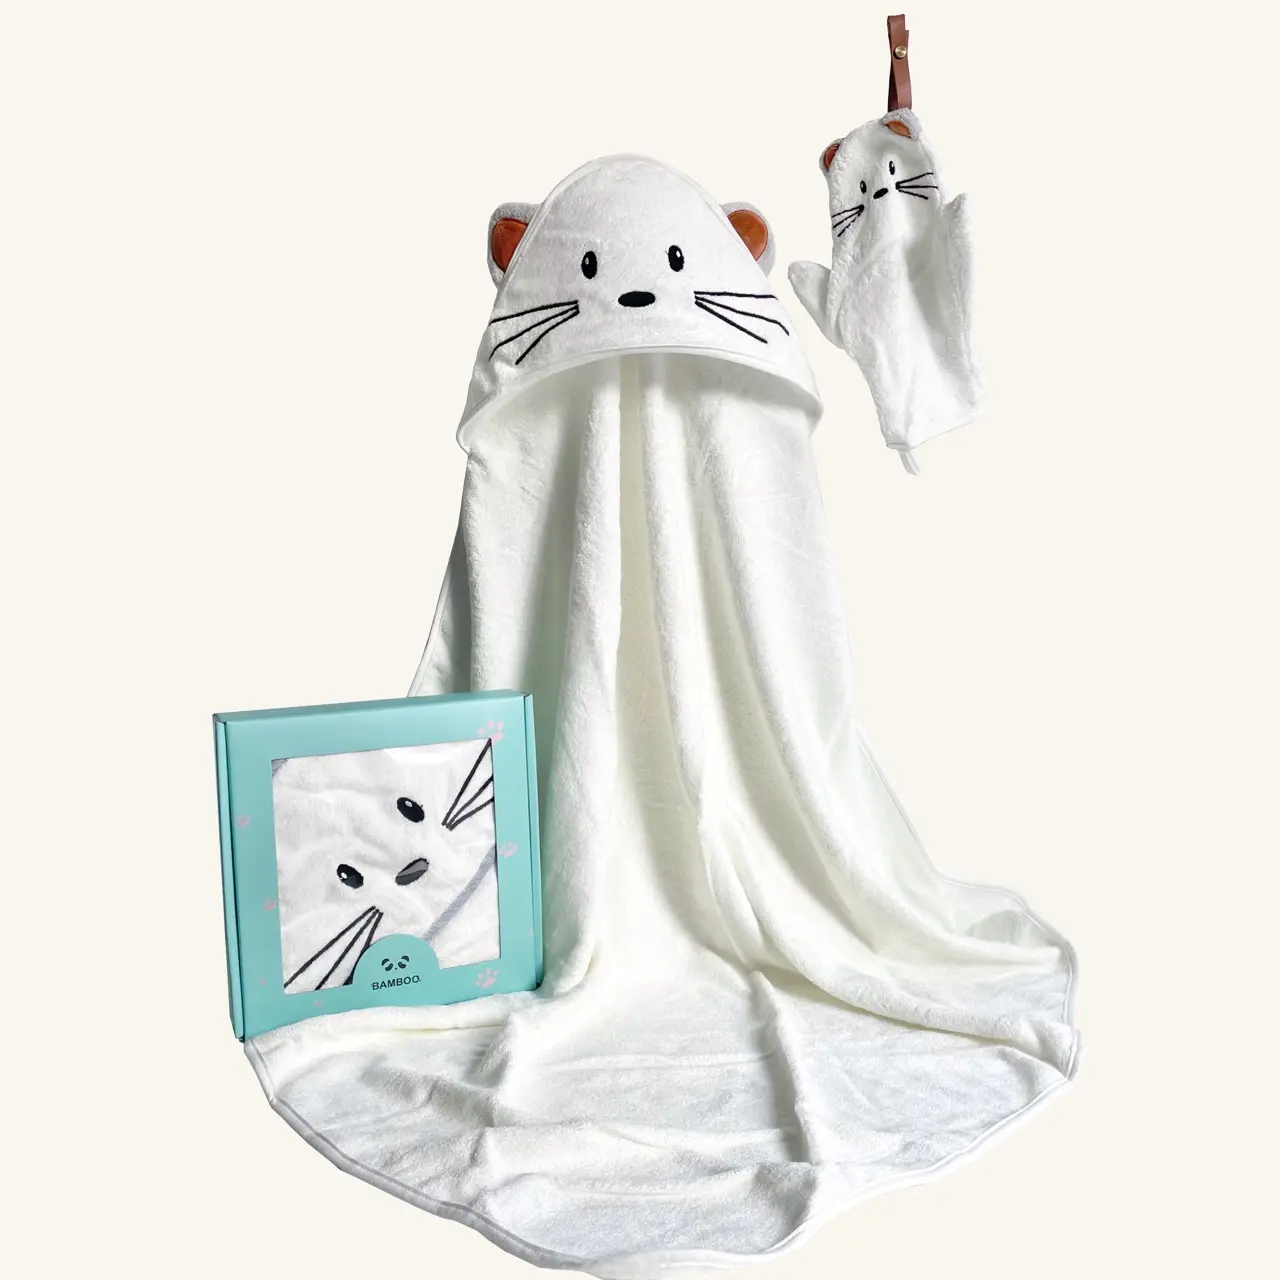 Hot selling 500GSM gift box-packed super soft bamboo bath towel mouse design bamboo hooded towel suit for kid